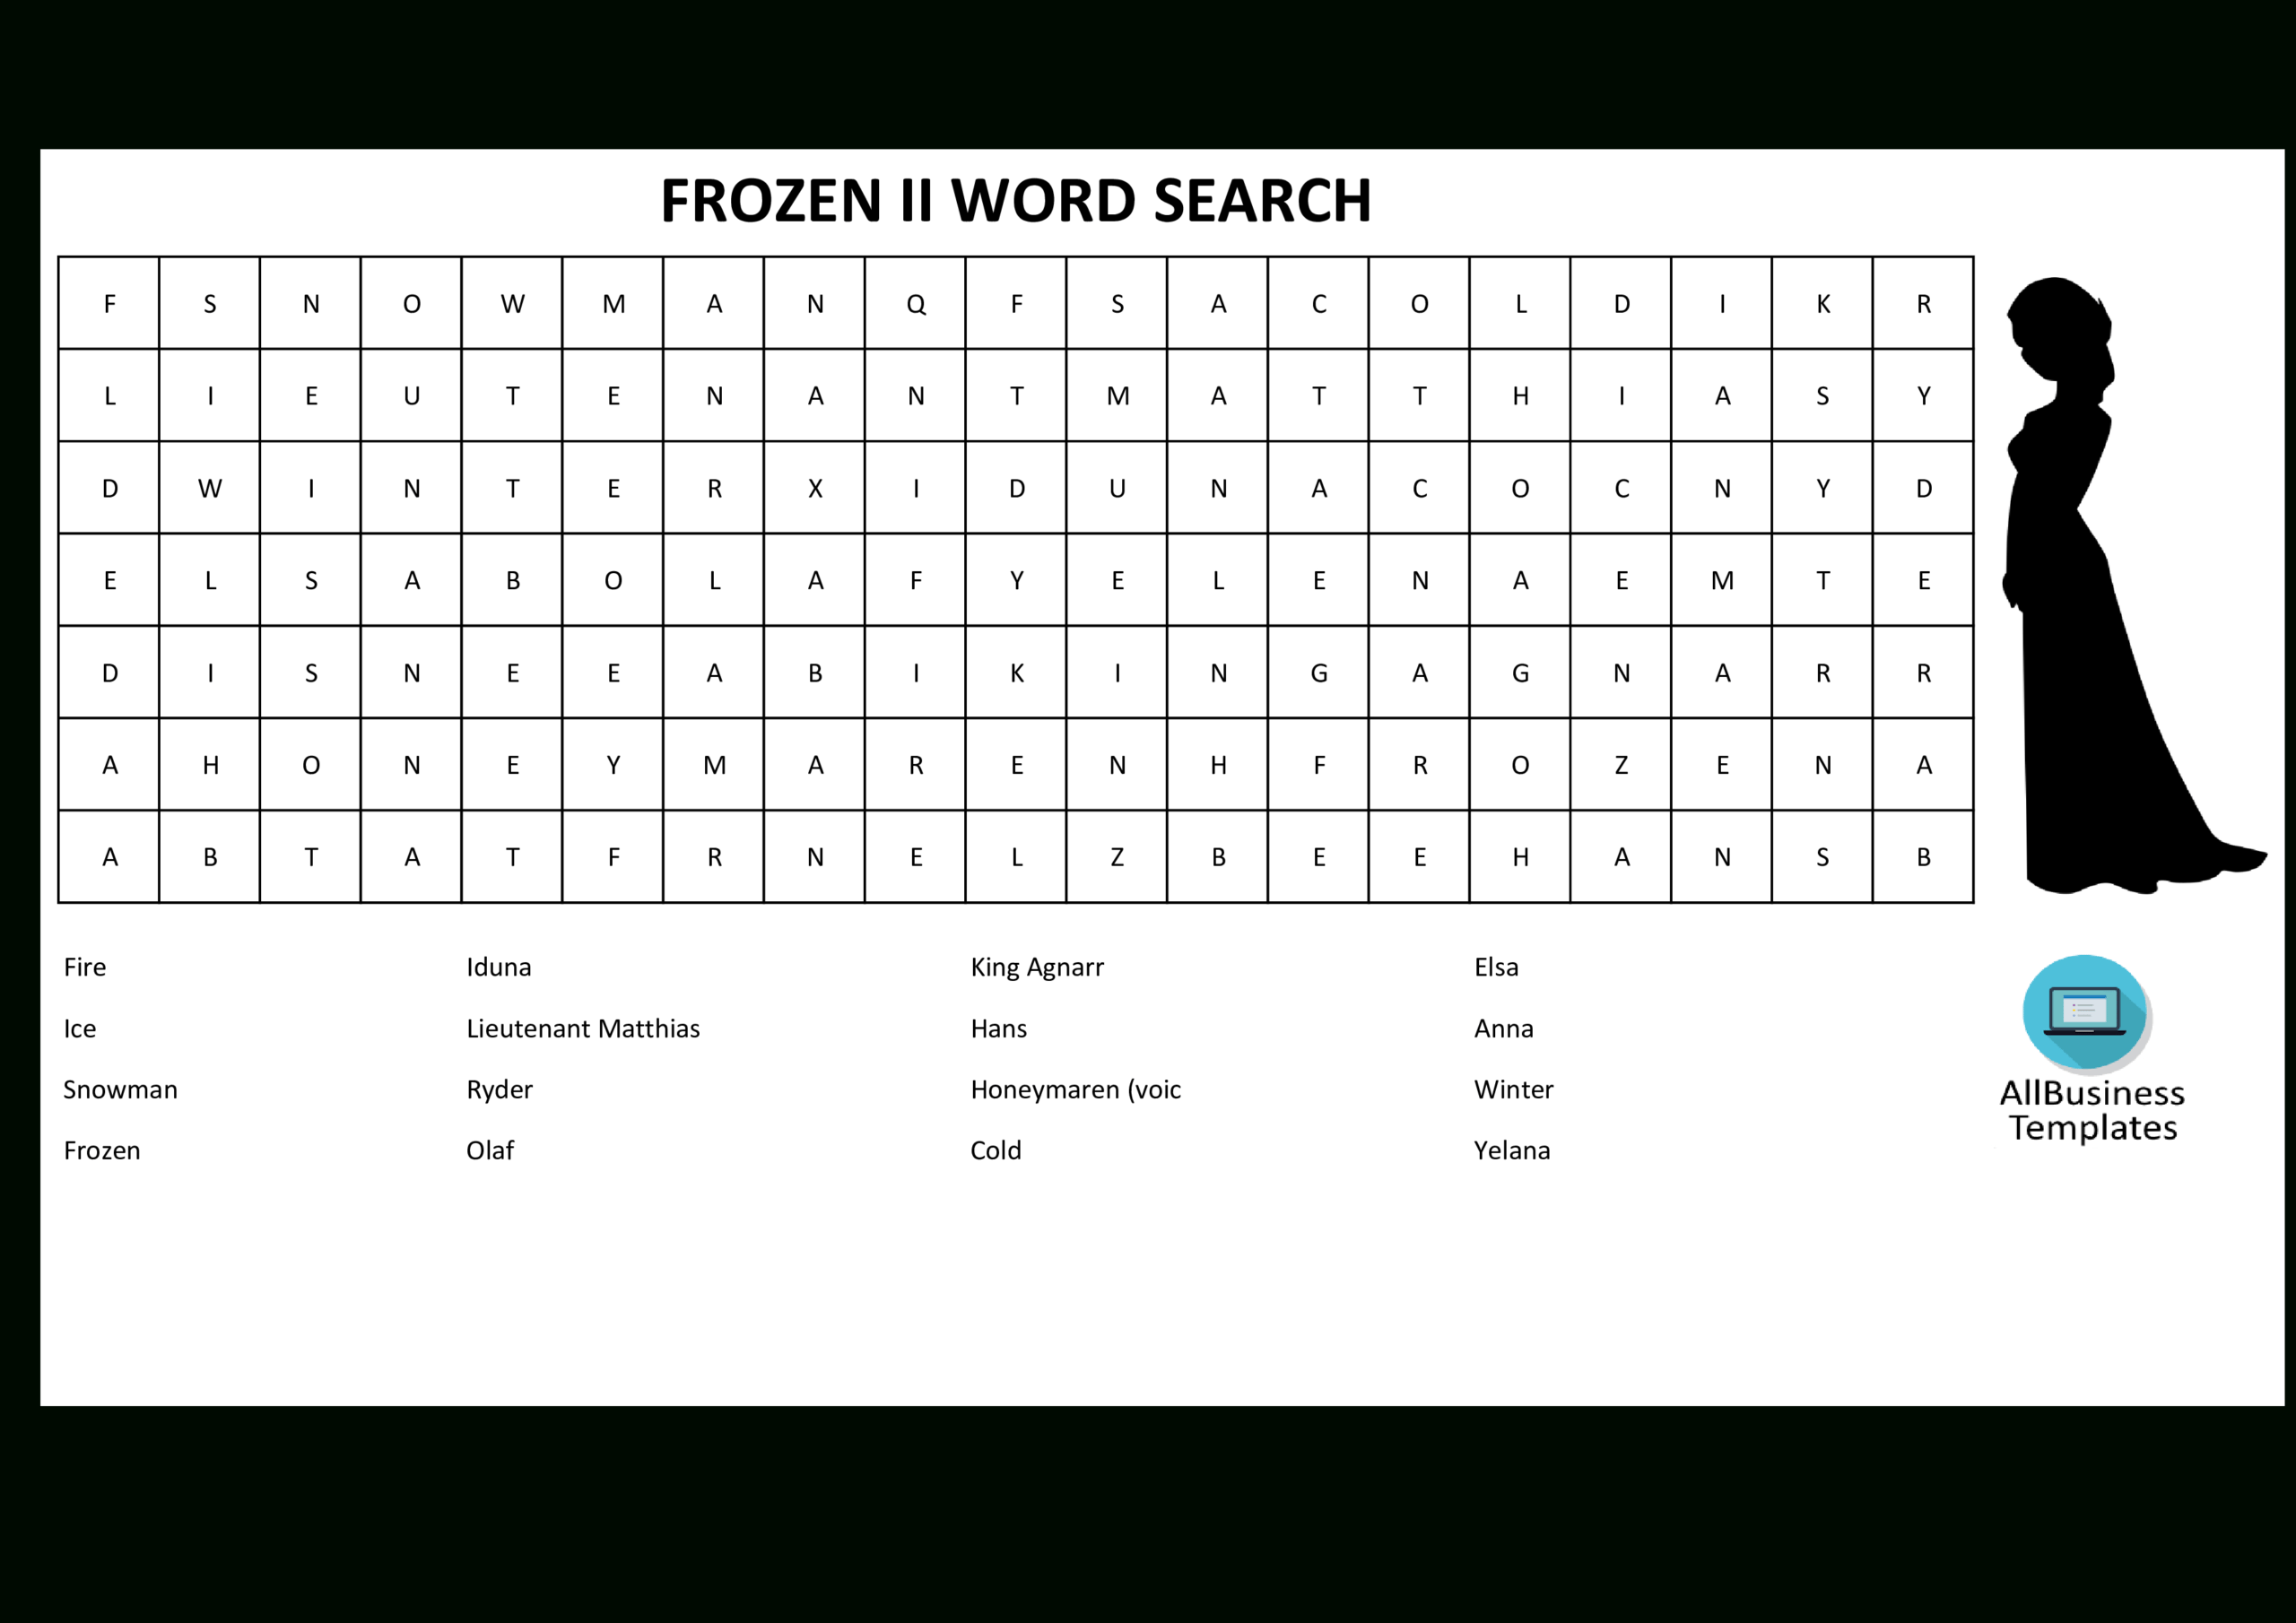 Word Search Frozen 2 With Answers | Templates At For Word Sleuth Template